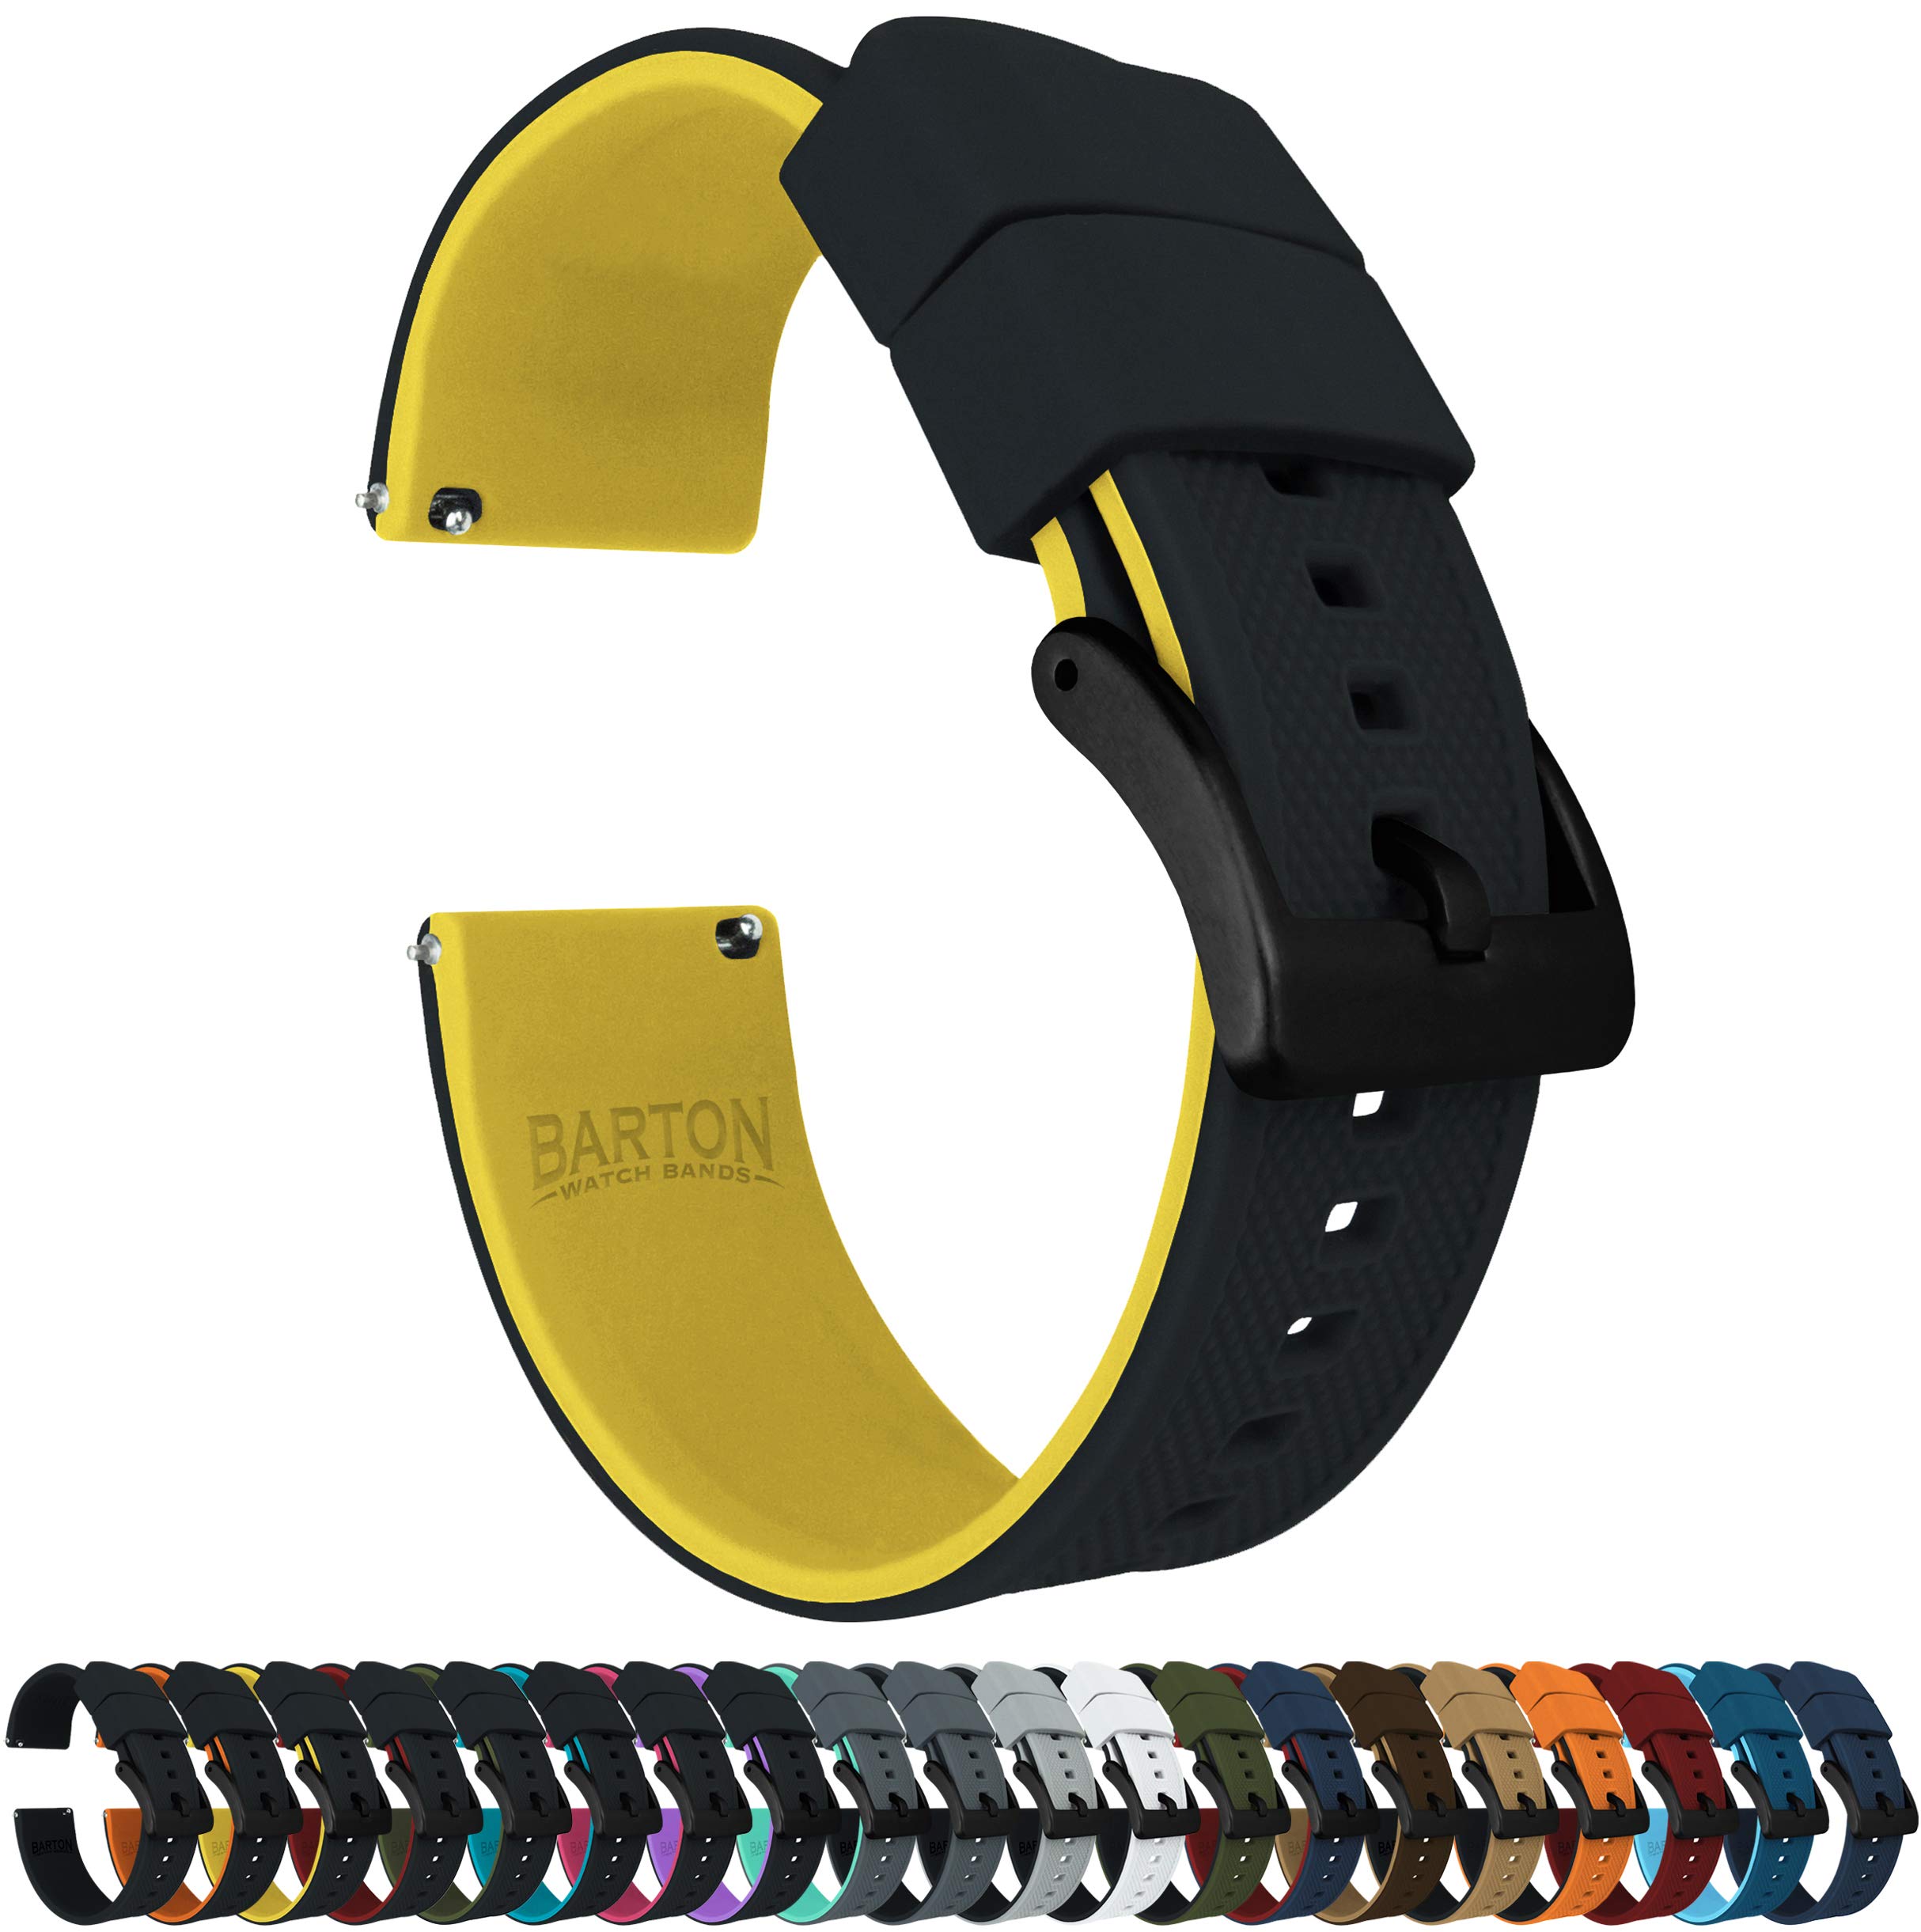 BARTON Elite Silicone Watch Bands - Quick Release - Choose Strap Color & Buckle Color (Stainless Steel, Black PVD or Gunmetal Grey) - 18mm, 19mm, 20mm, 21mm, 22mm, 23mm & 24mm Watch Straps